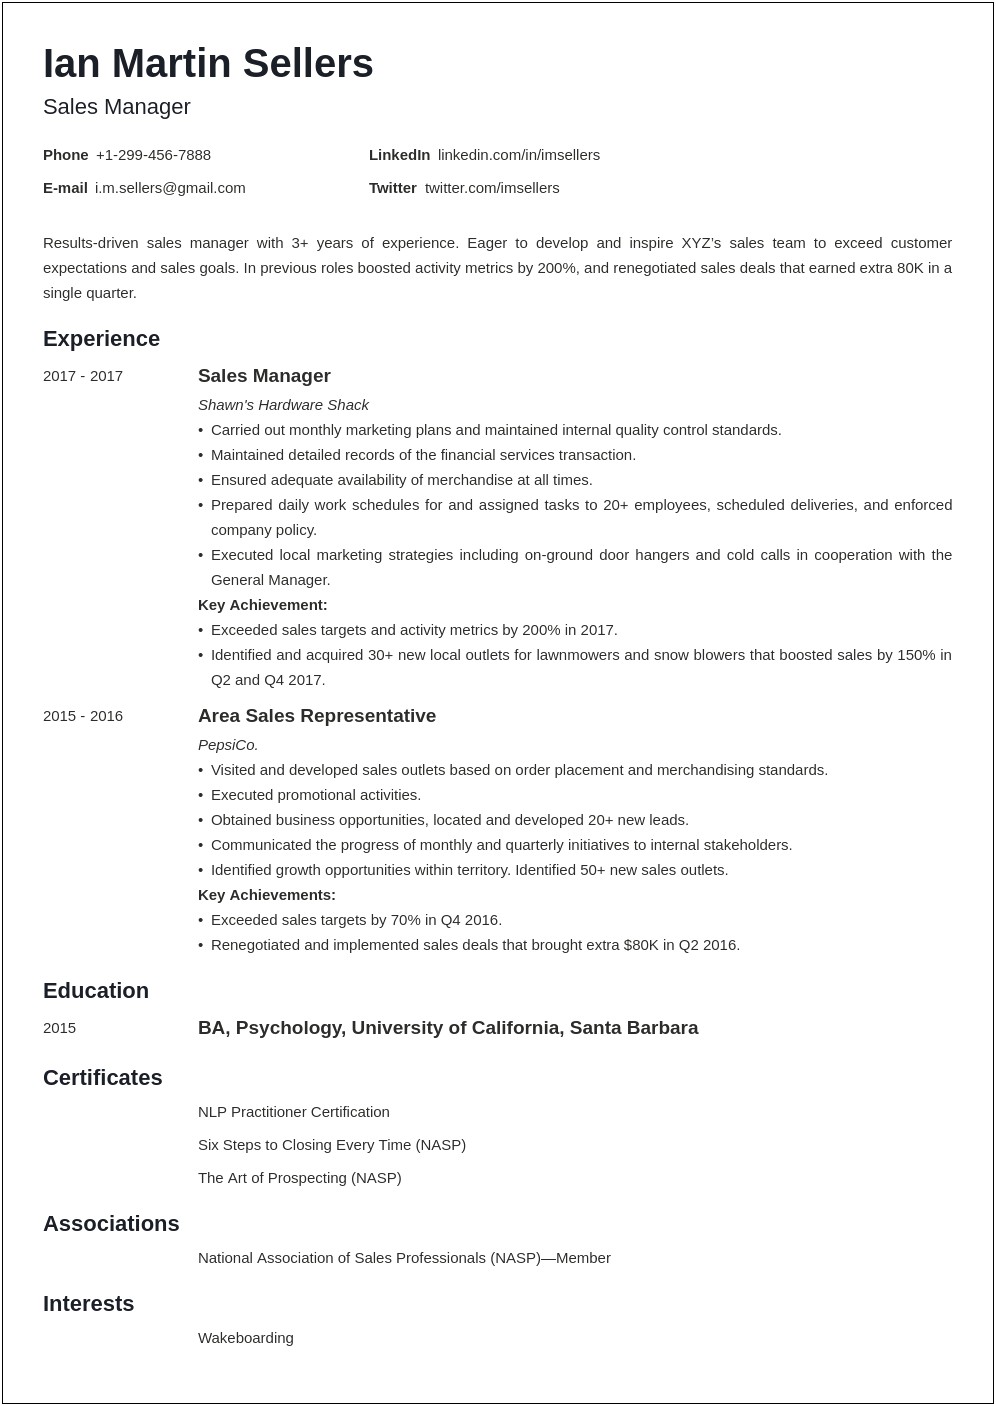 Best Resume Summary For Sales Manager